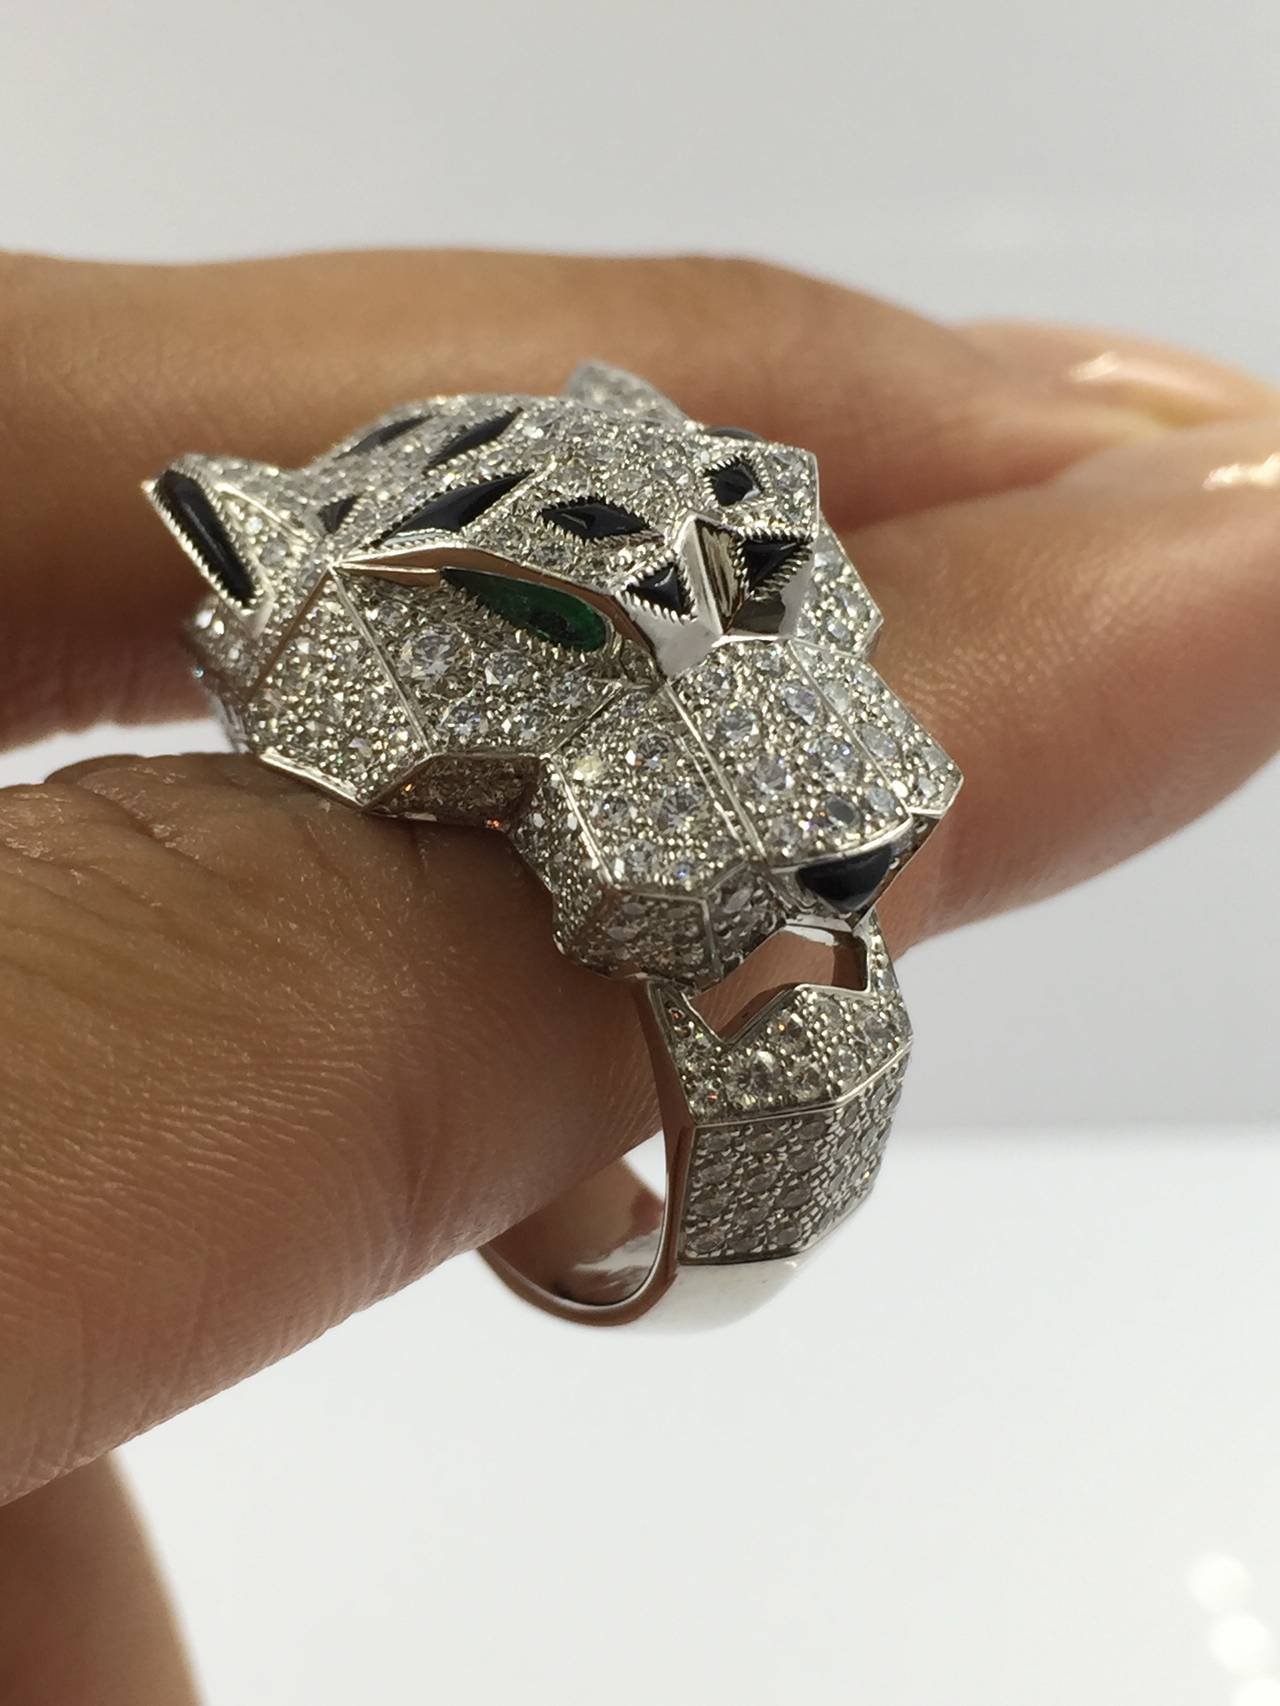 Cartier, A Panther Ring, designed as a sculpted pavé-set diamond panther band, with calibré-cut onyx spots, enhanced by marquise-cut emerald eyes,
 mounted in white gold, signed Cartier, 750, 56 and numbered 91655B, circa 2013. Panthère de